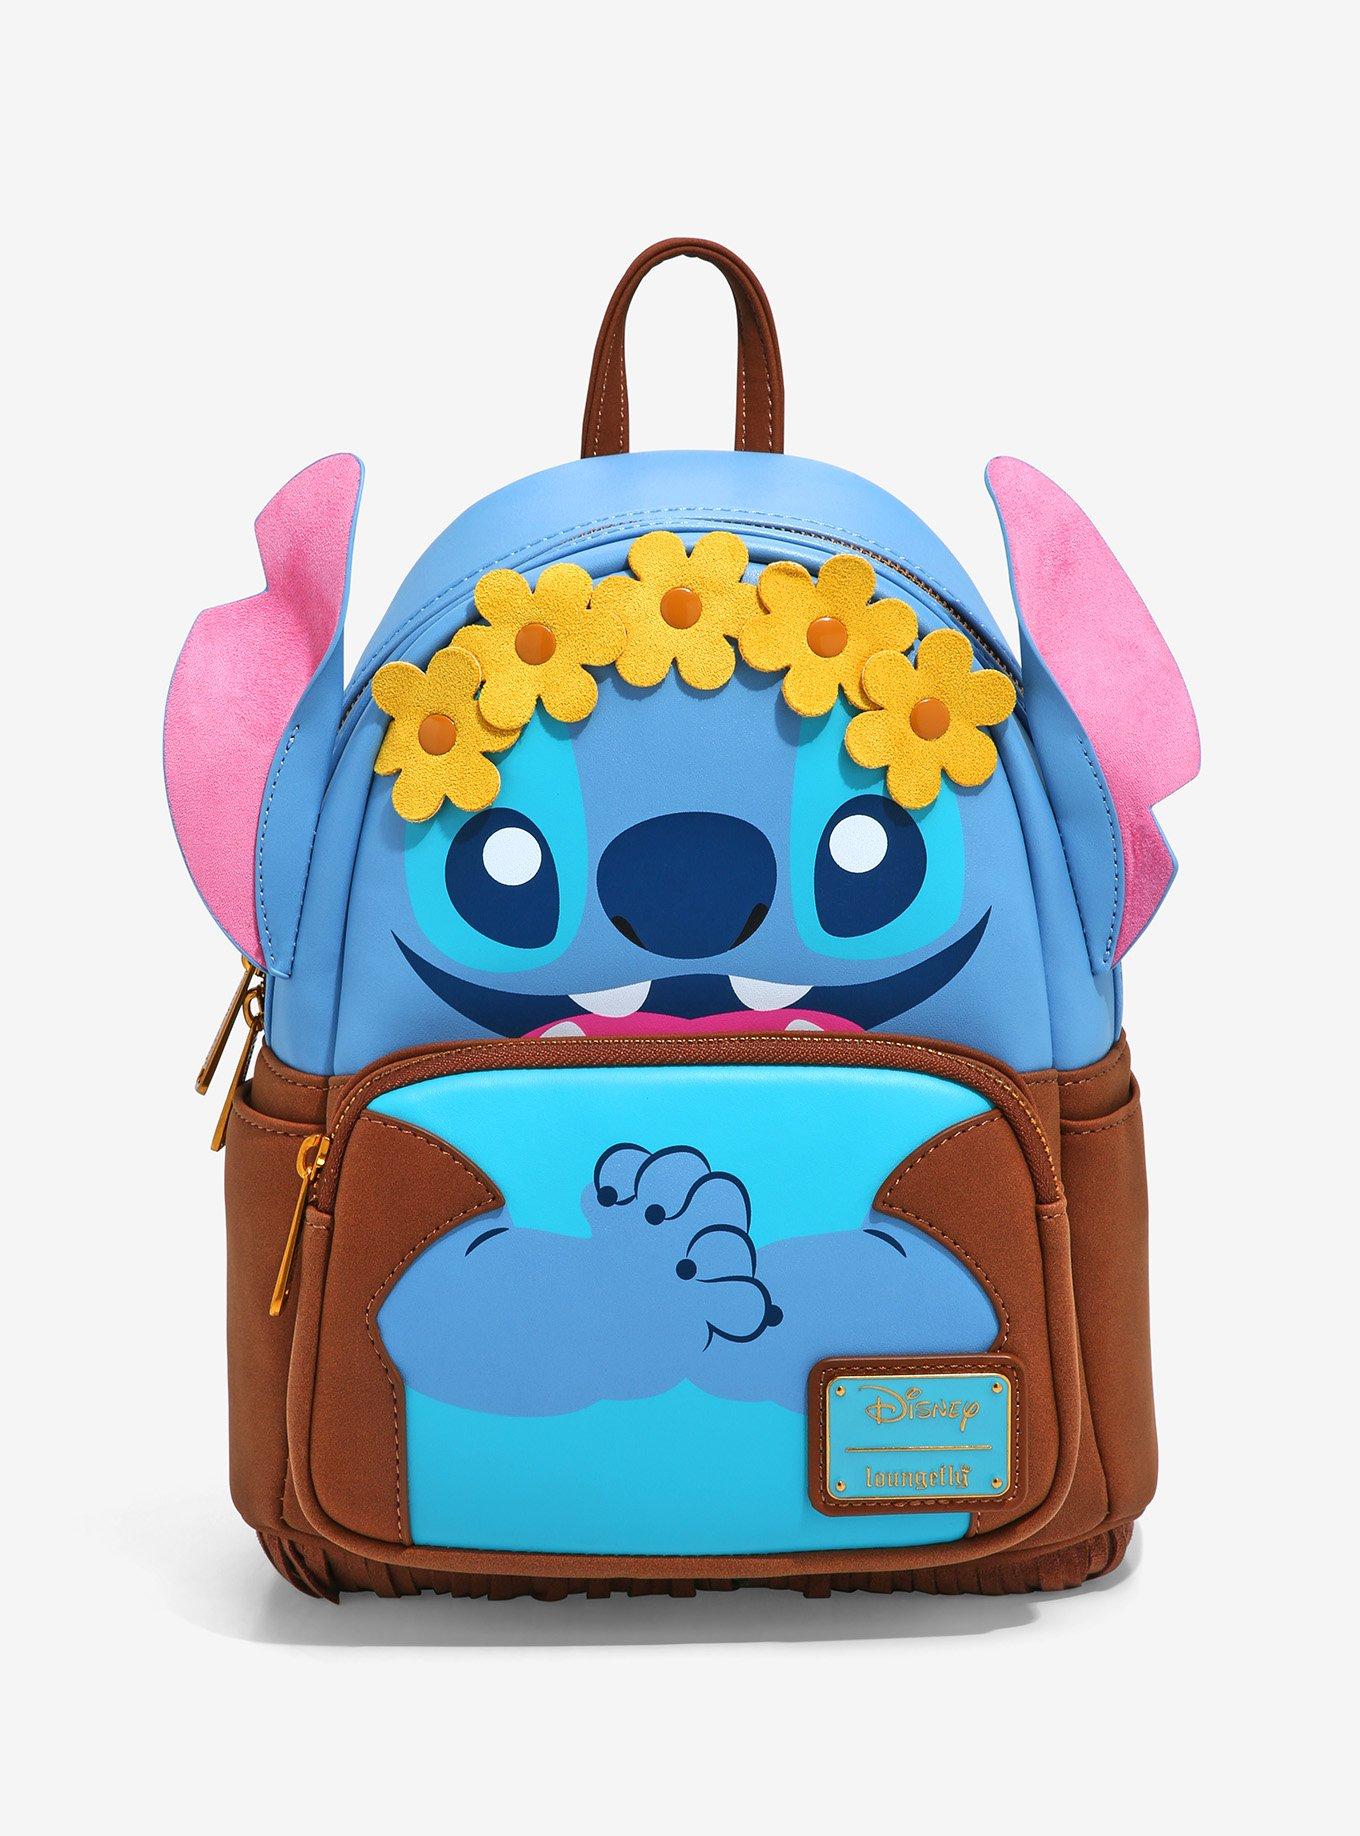 Loungefly Stitch Platinum Disney 100 Mini Backpack LE 1400 With free dust  bag